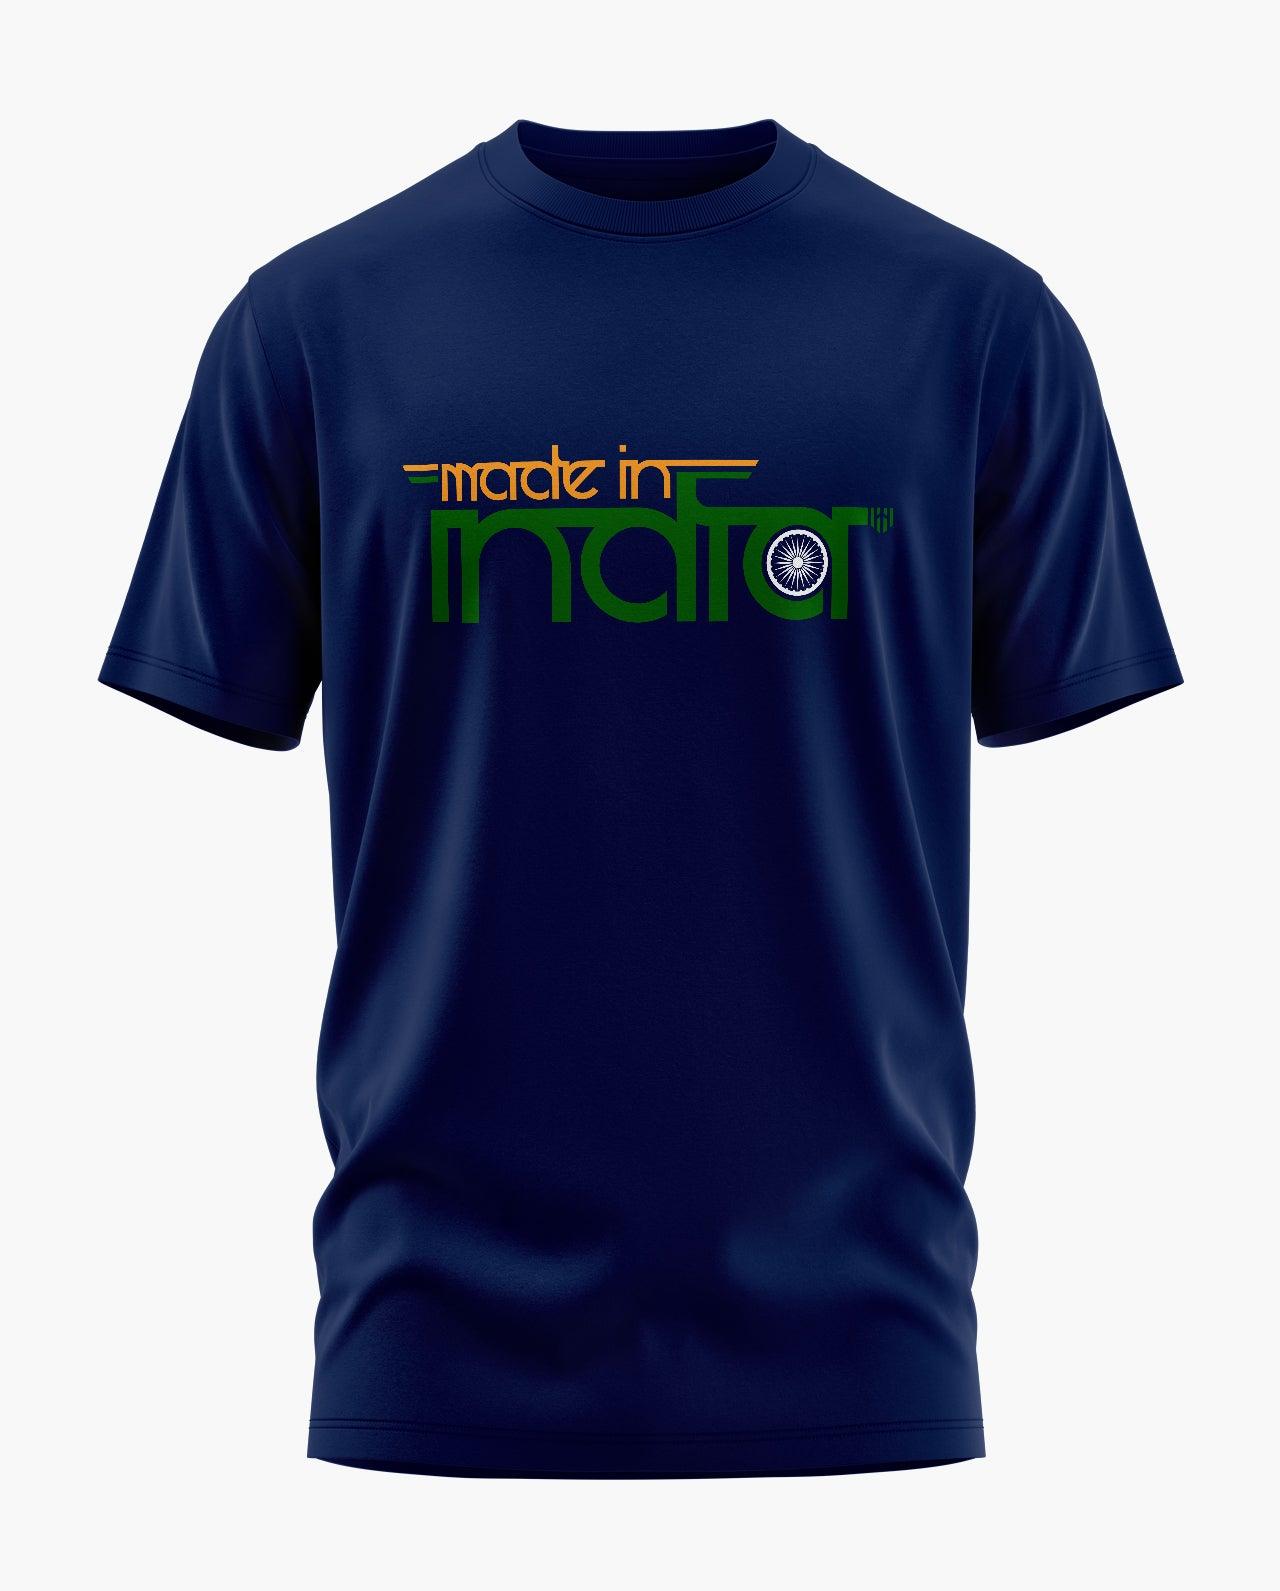 Made in India T-Shirt - Aero Armour